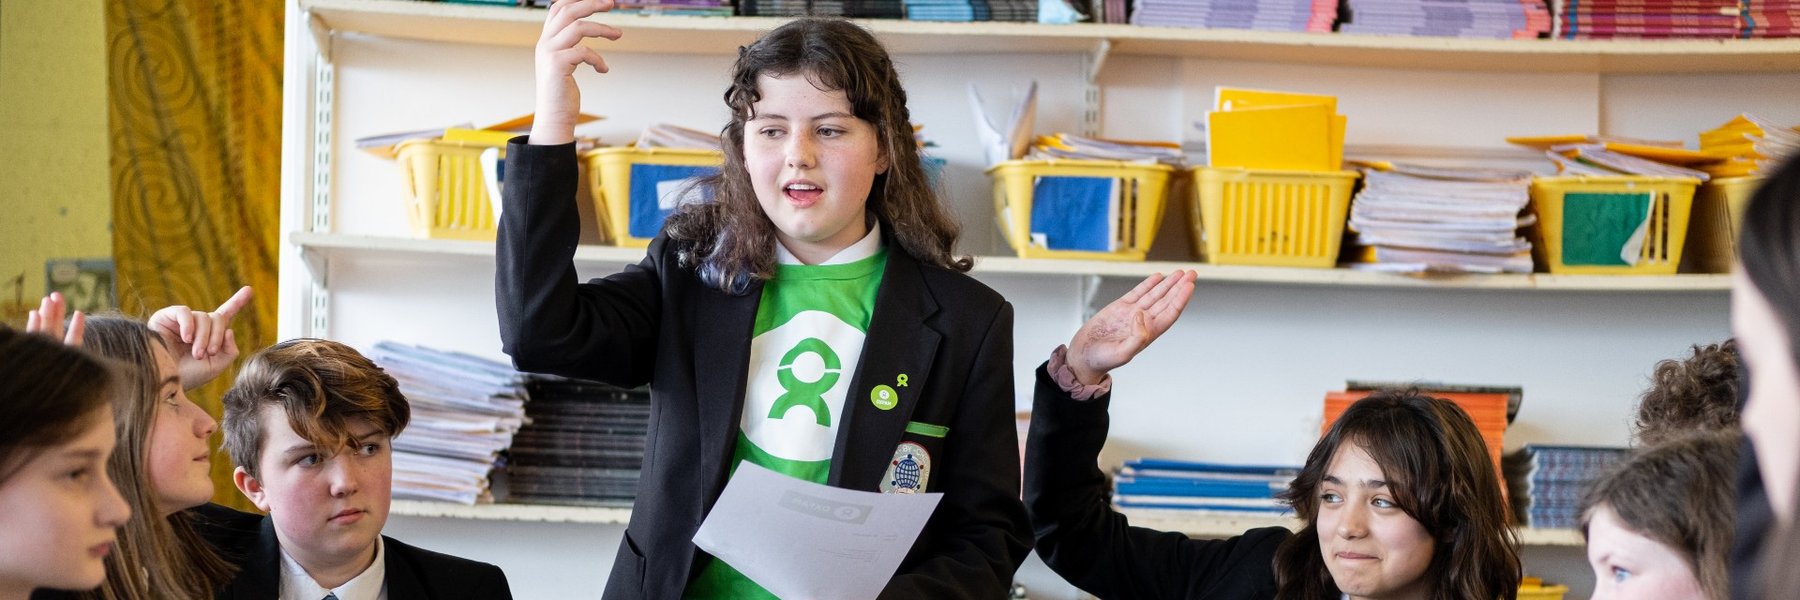 Young people in a classroom in the UK discuss ideas for taking action on global issues.